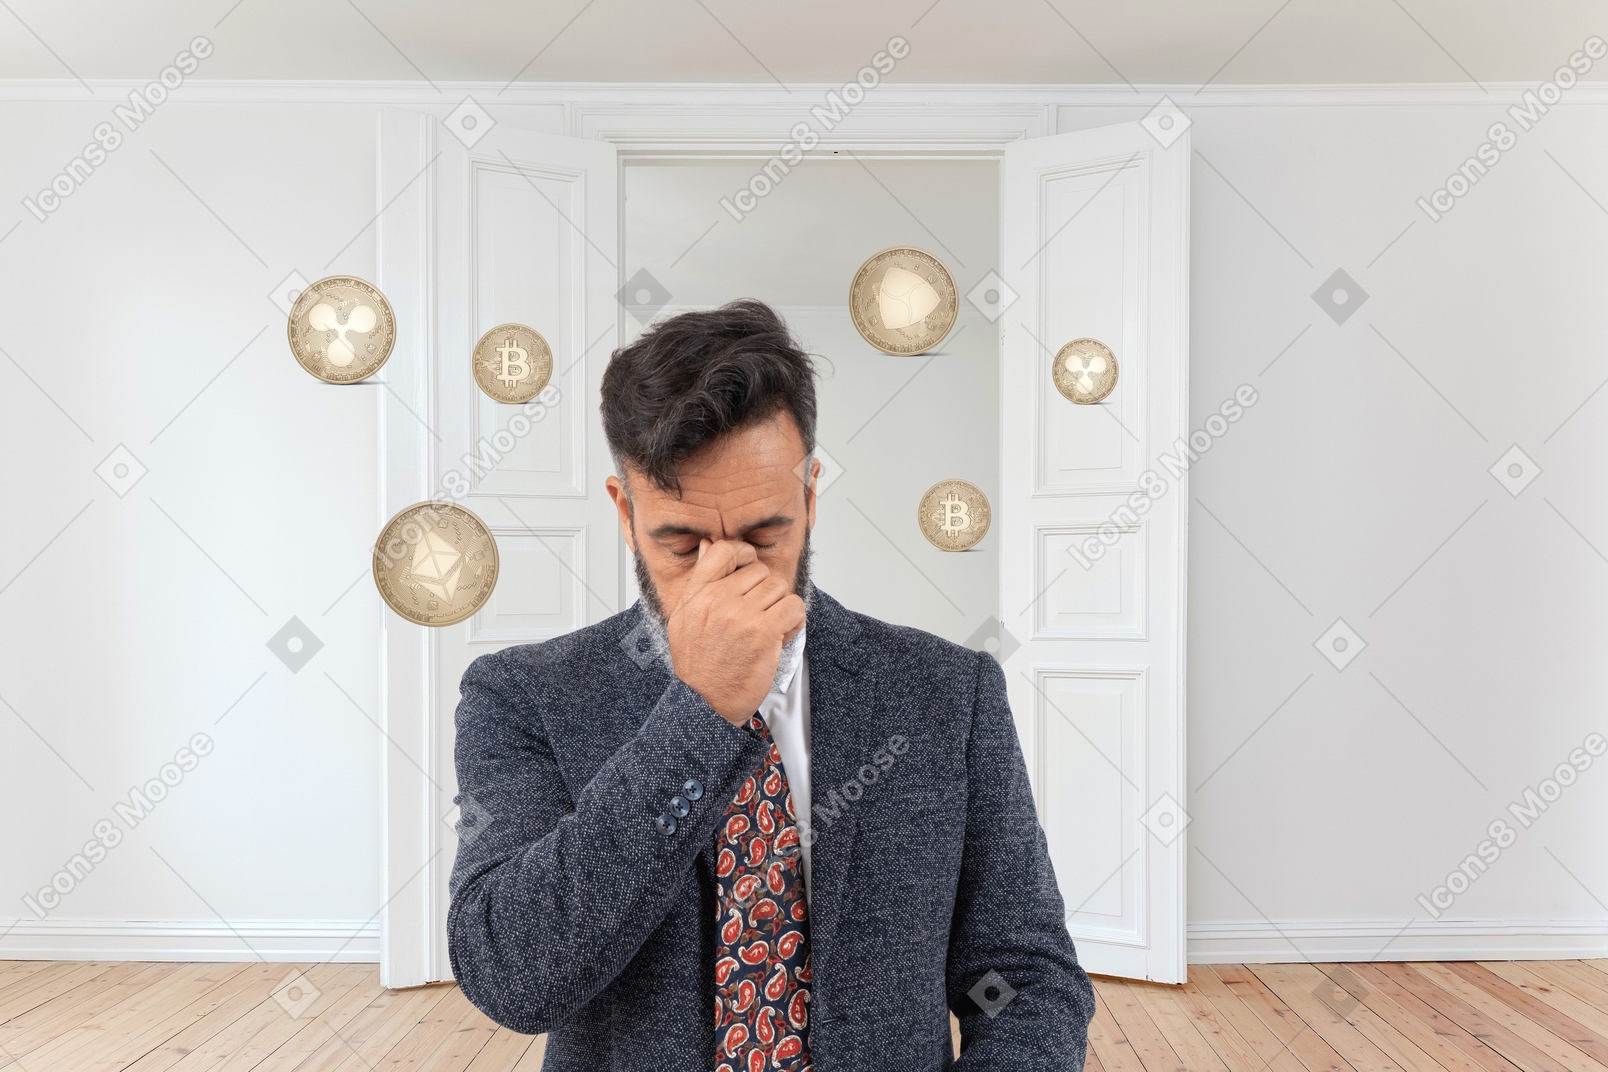 Frustrated man surrounded by coins